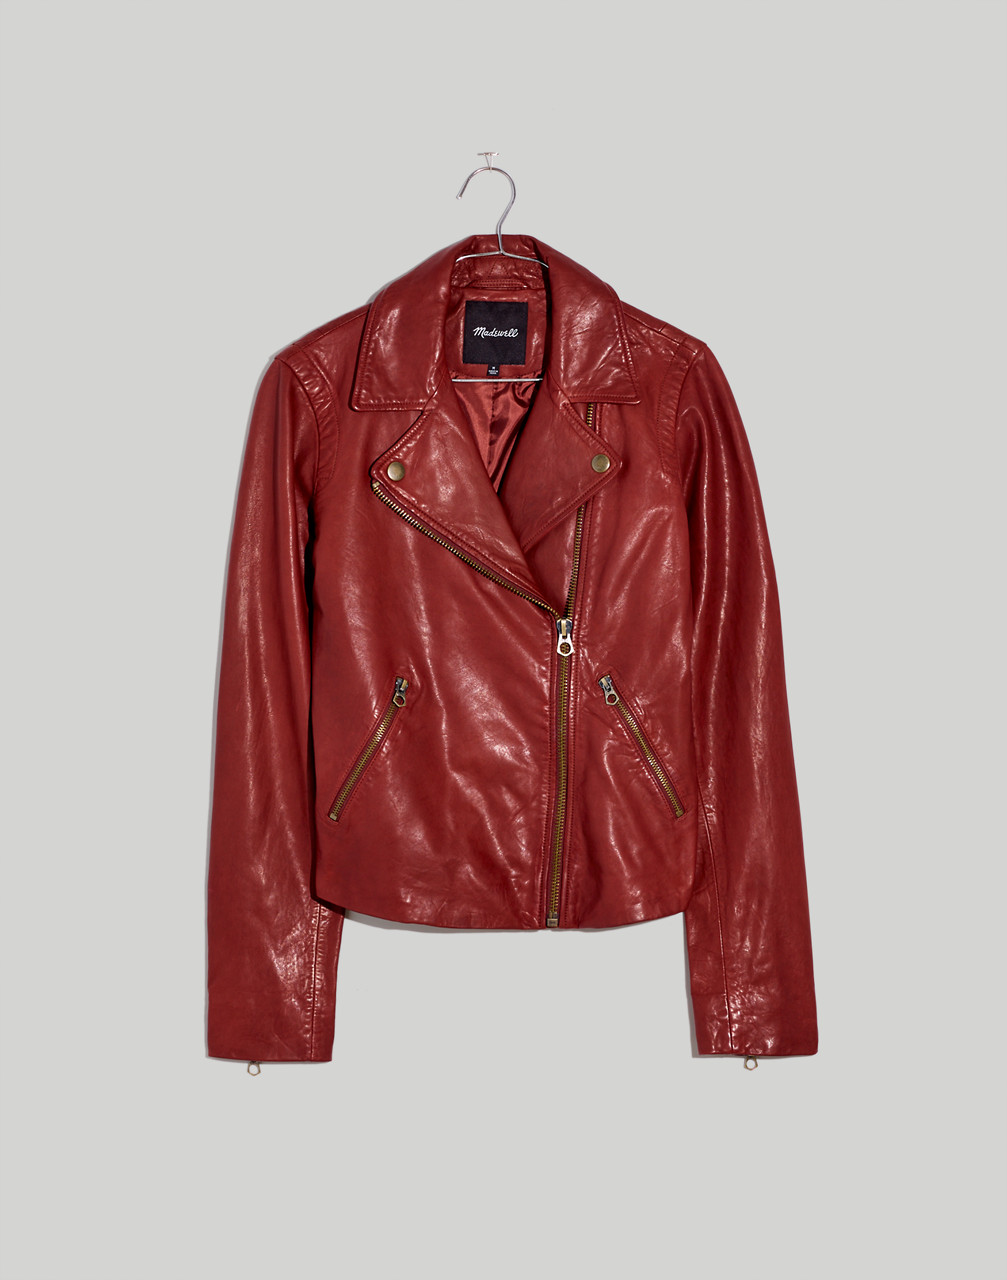 Mw Washed Leather Motorcycle Jacket: Brass Hardware Edition In Dusty Redwood